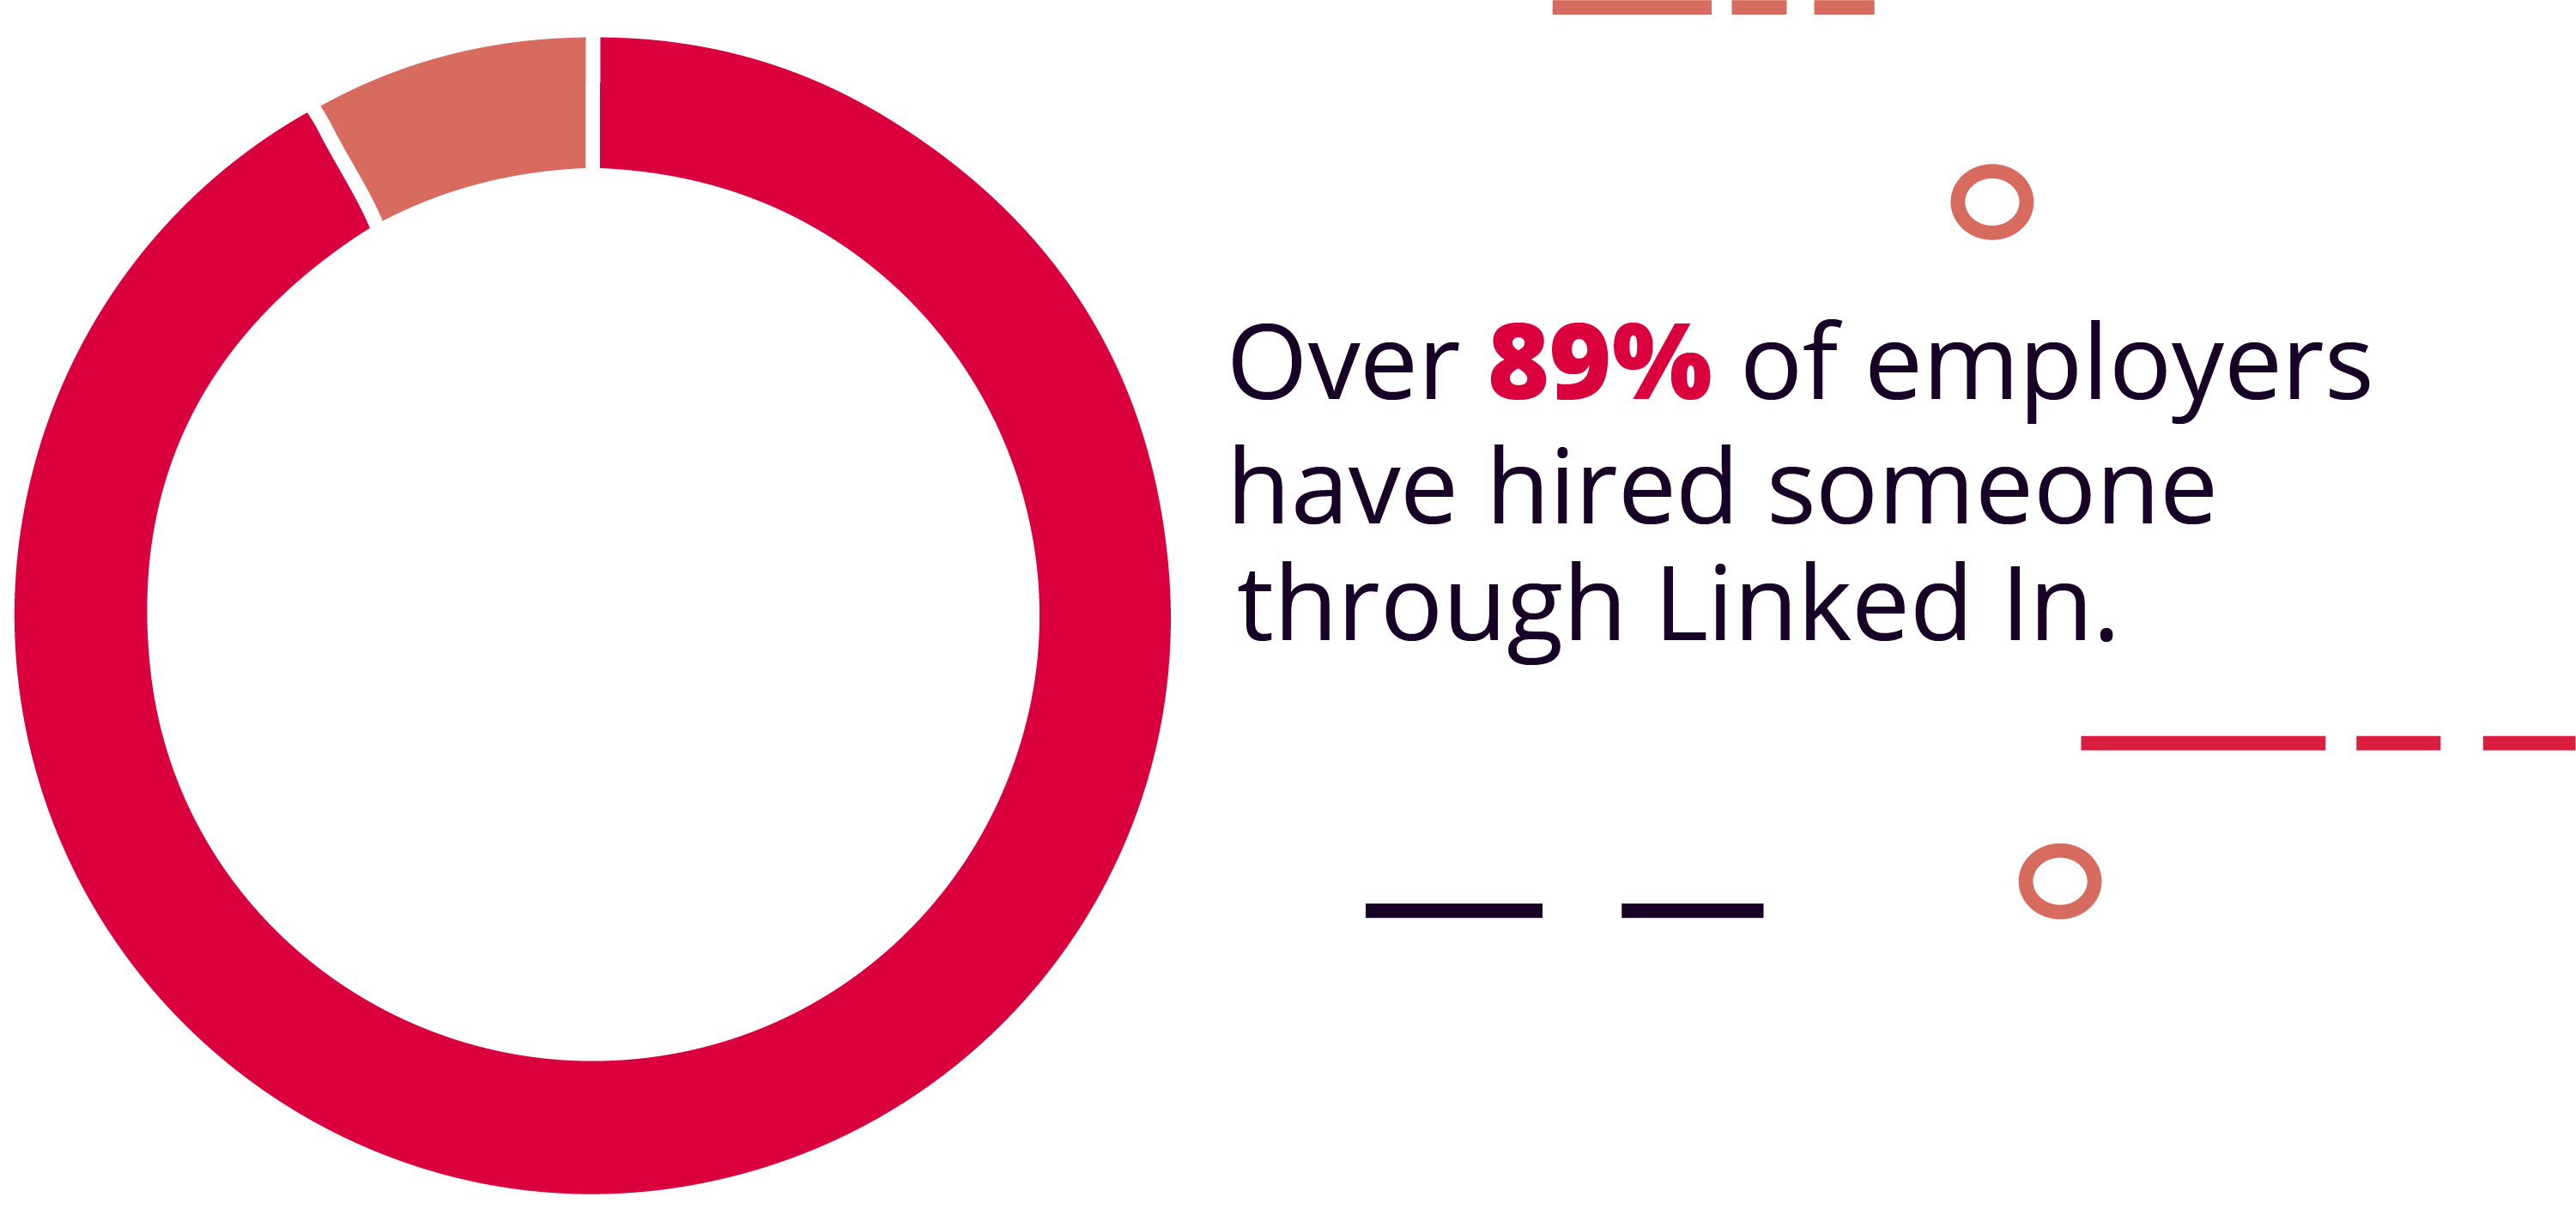 Over 89% of employers have hired someone through LinkedIn